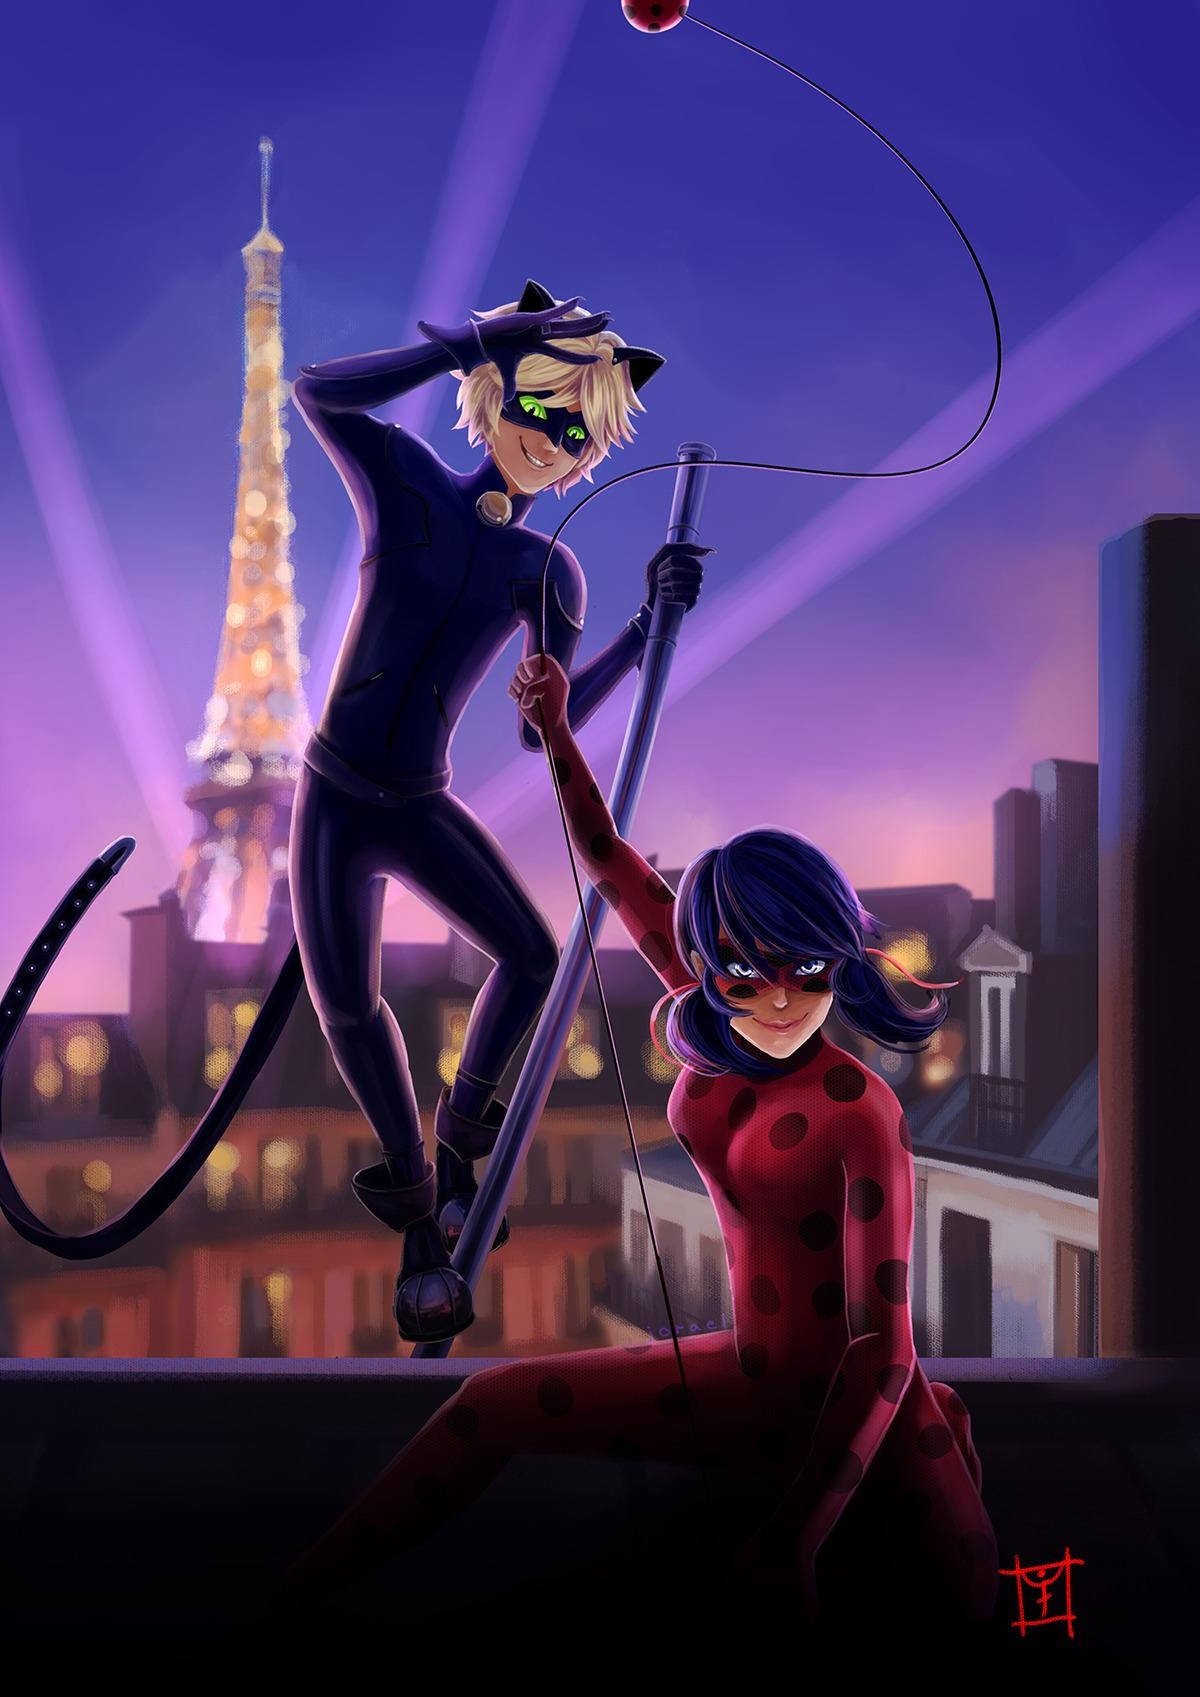 Ladybug And Cat Noir Action Poses In Paris